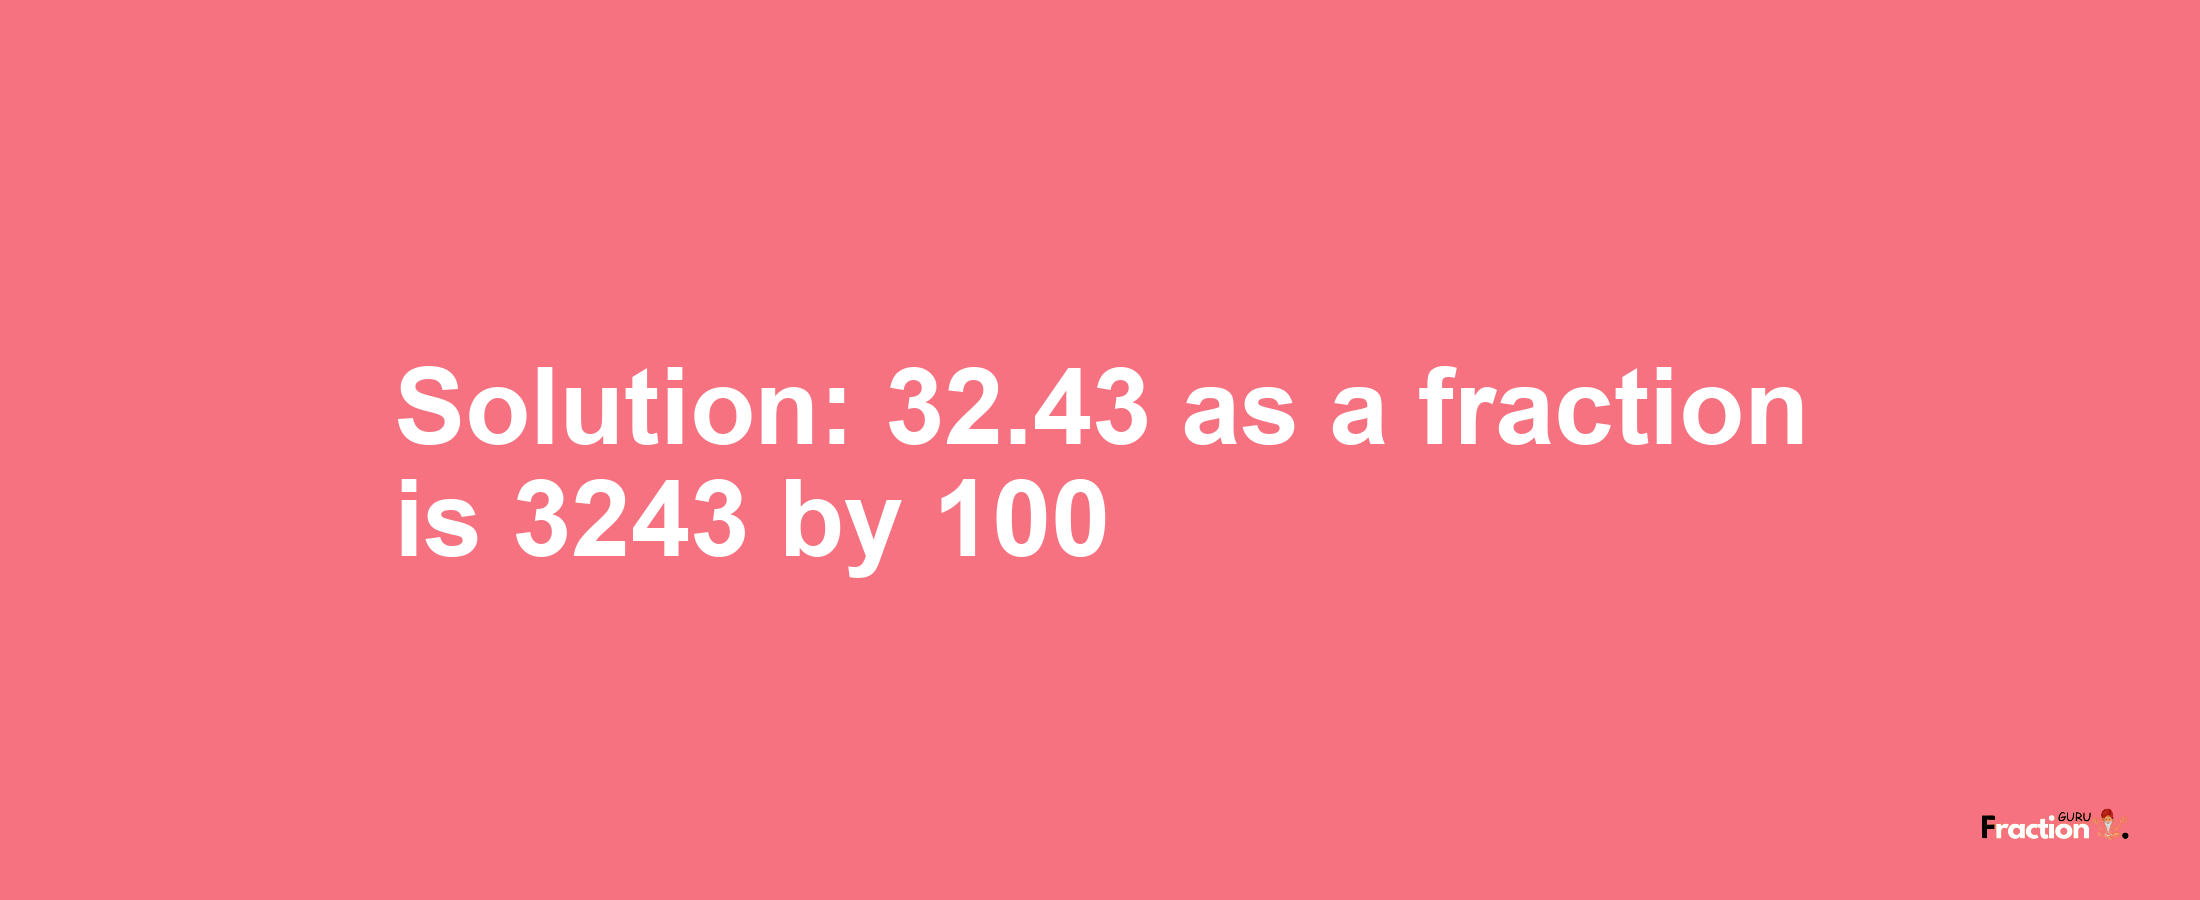 Solution:32.43 as a fraction is 3243/100